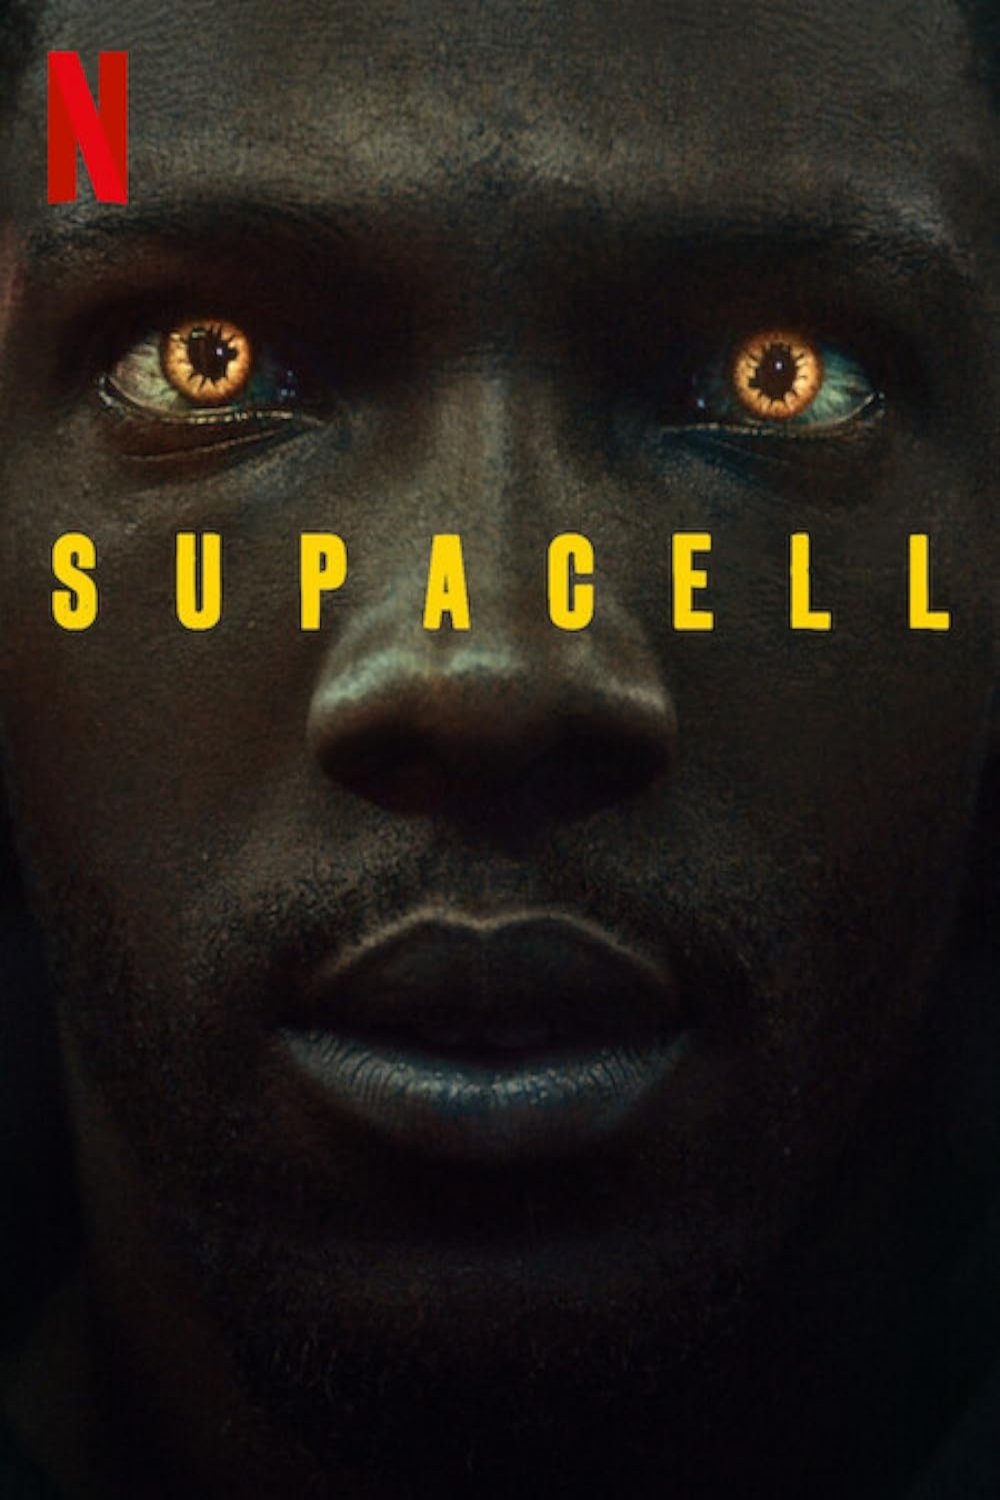 Poster of the movie Supacell